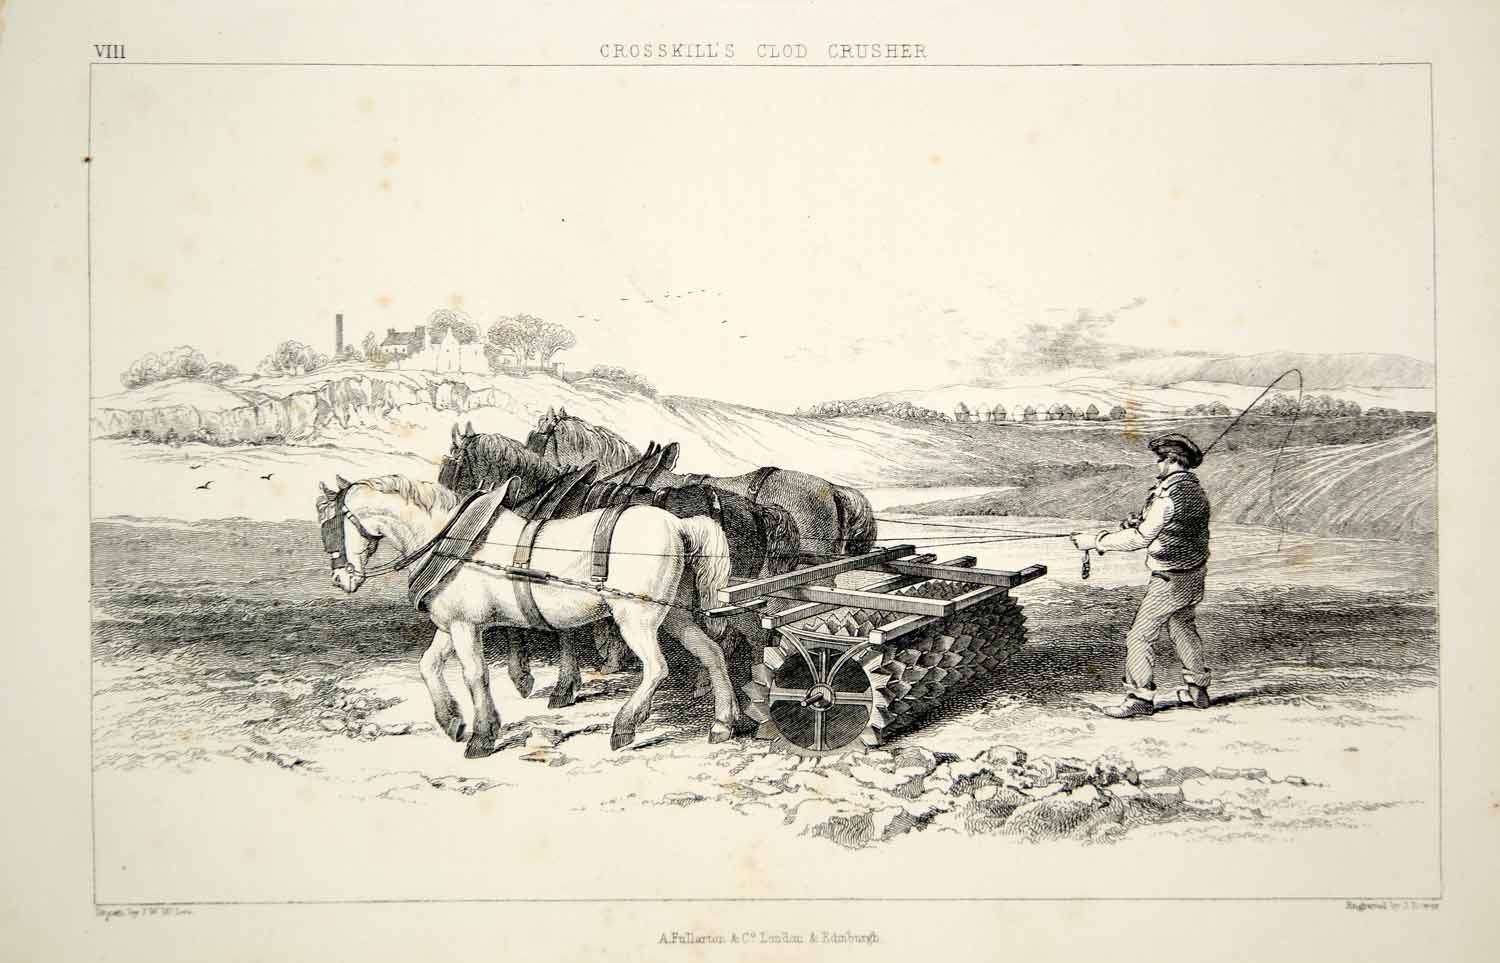 1852 Steel Engraving Antique Crosskill Clod Crusher Soil Machine Agriculture FD1